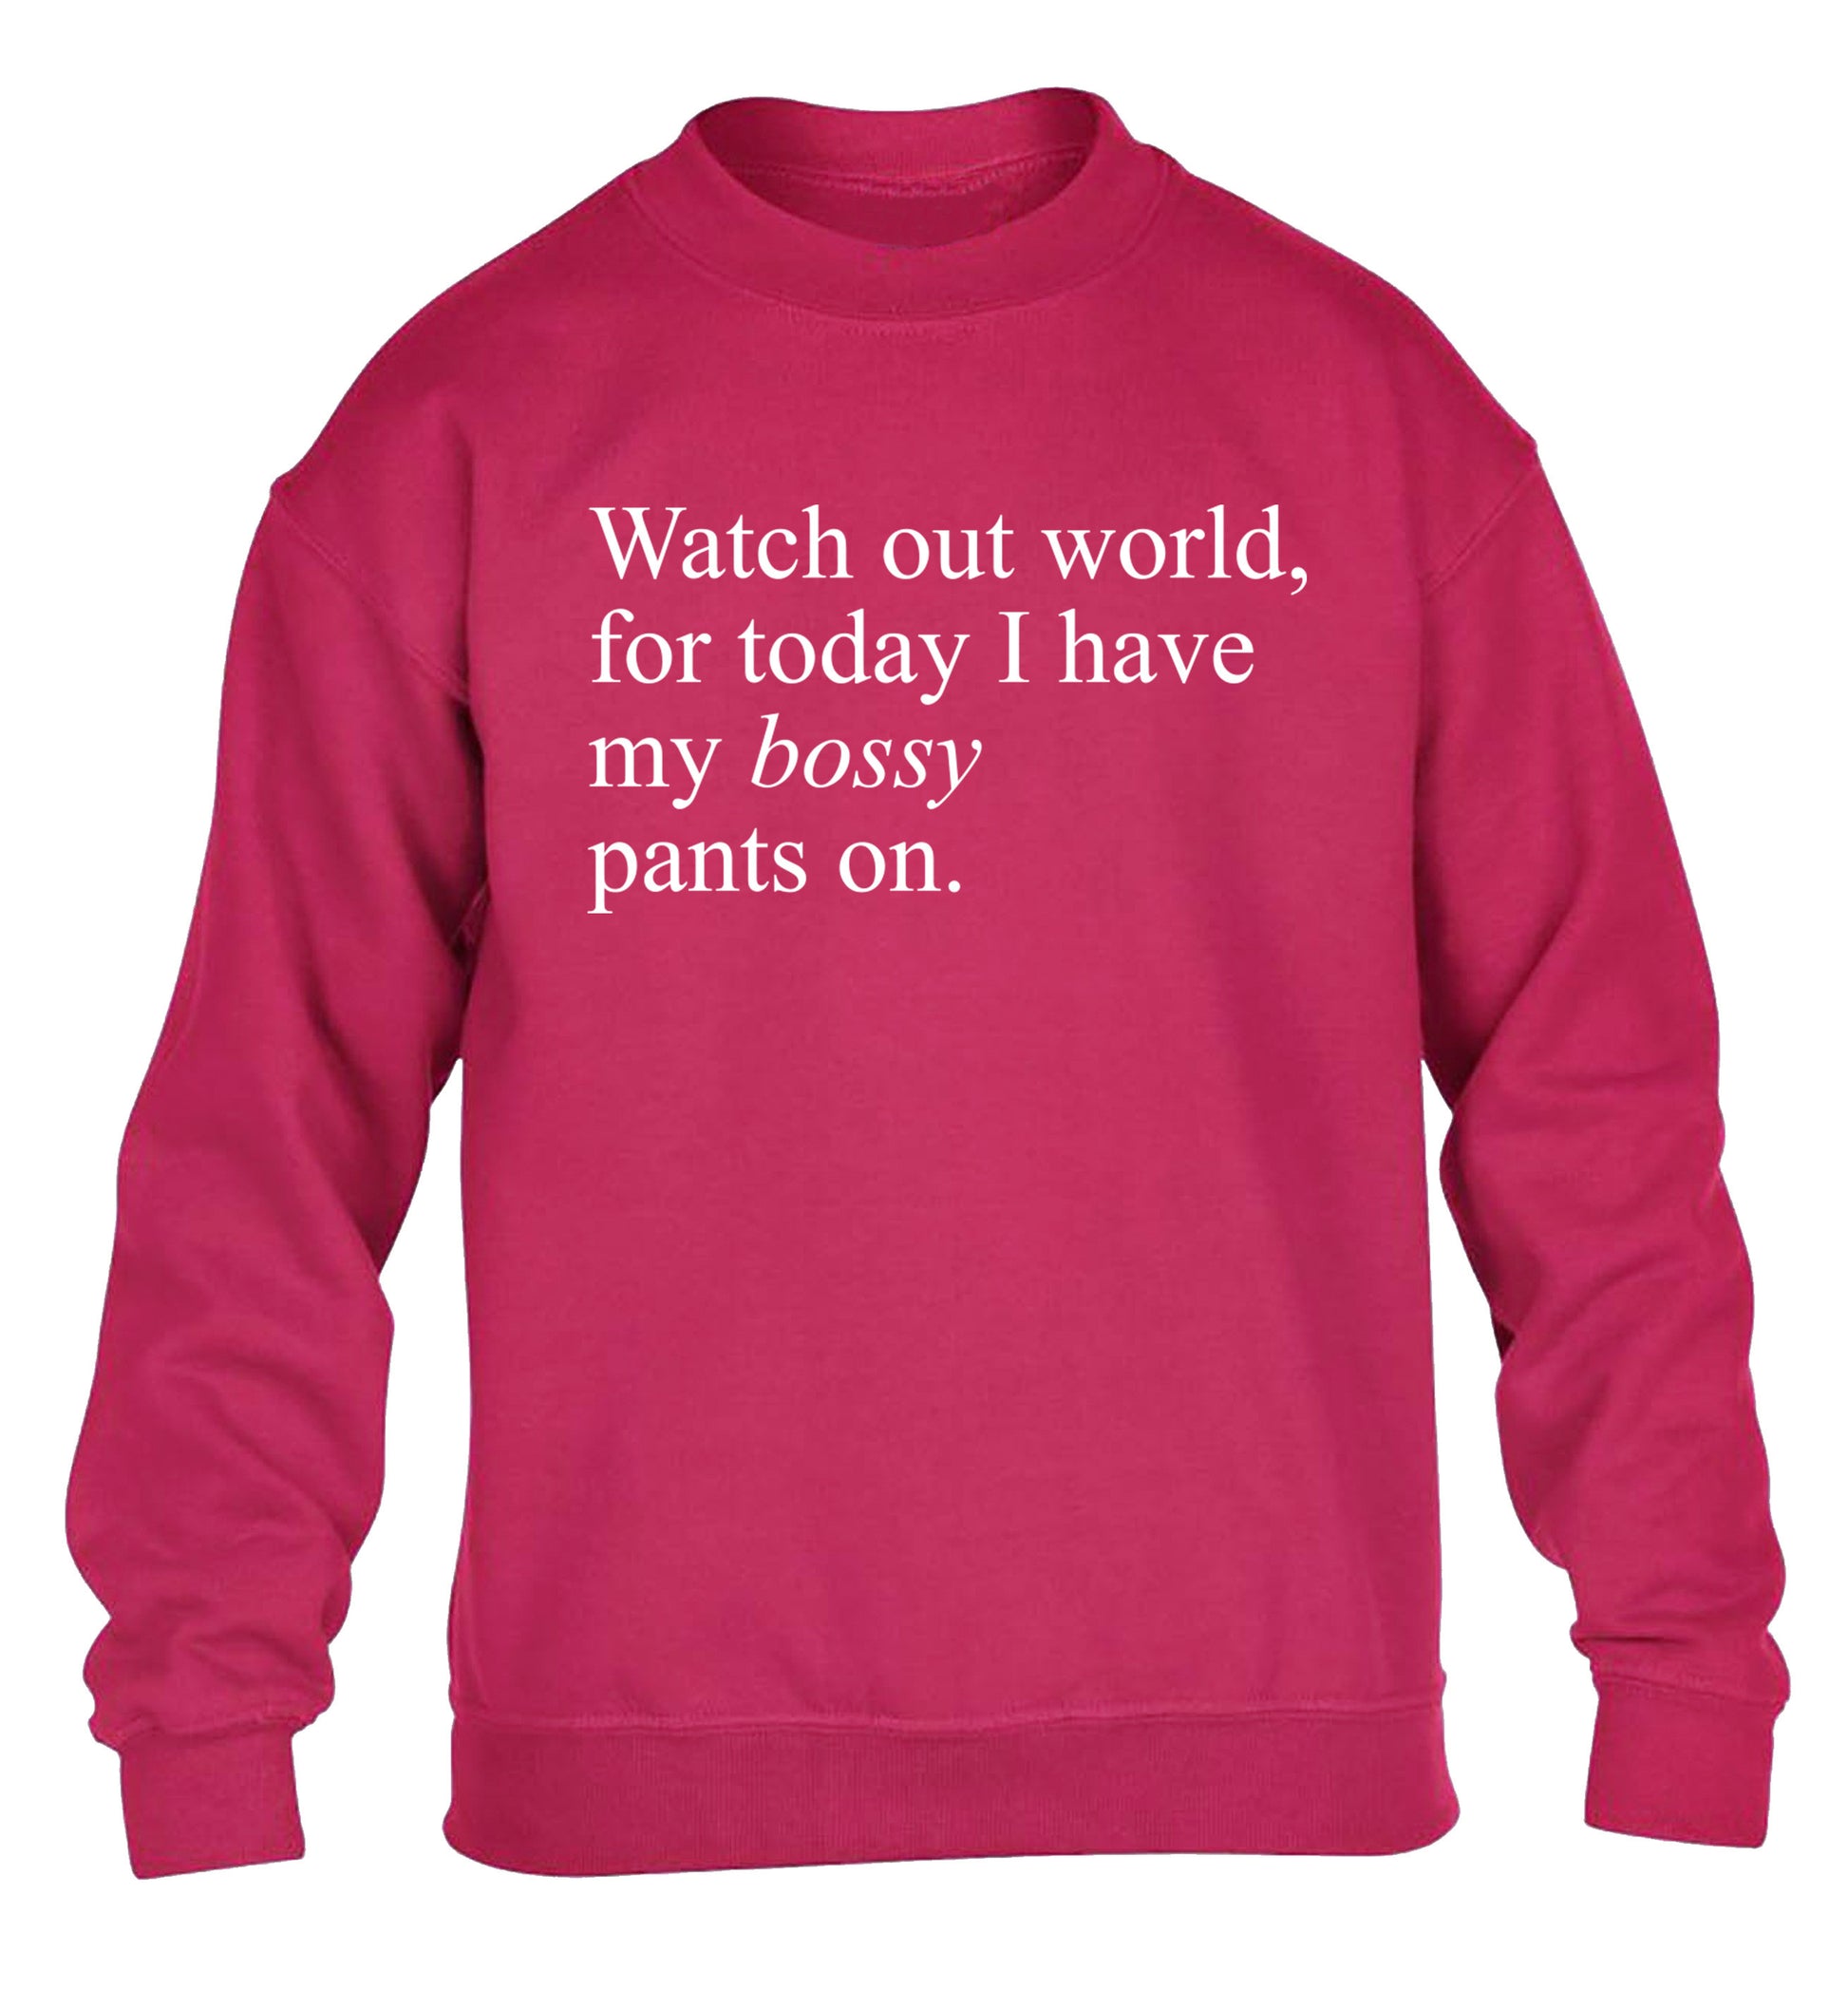 Watch out world, for today I have my bossy pants on children's pink sweater 12-14 Years